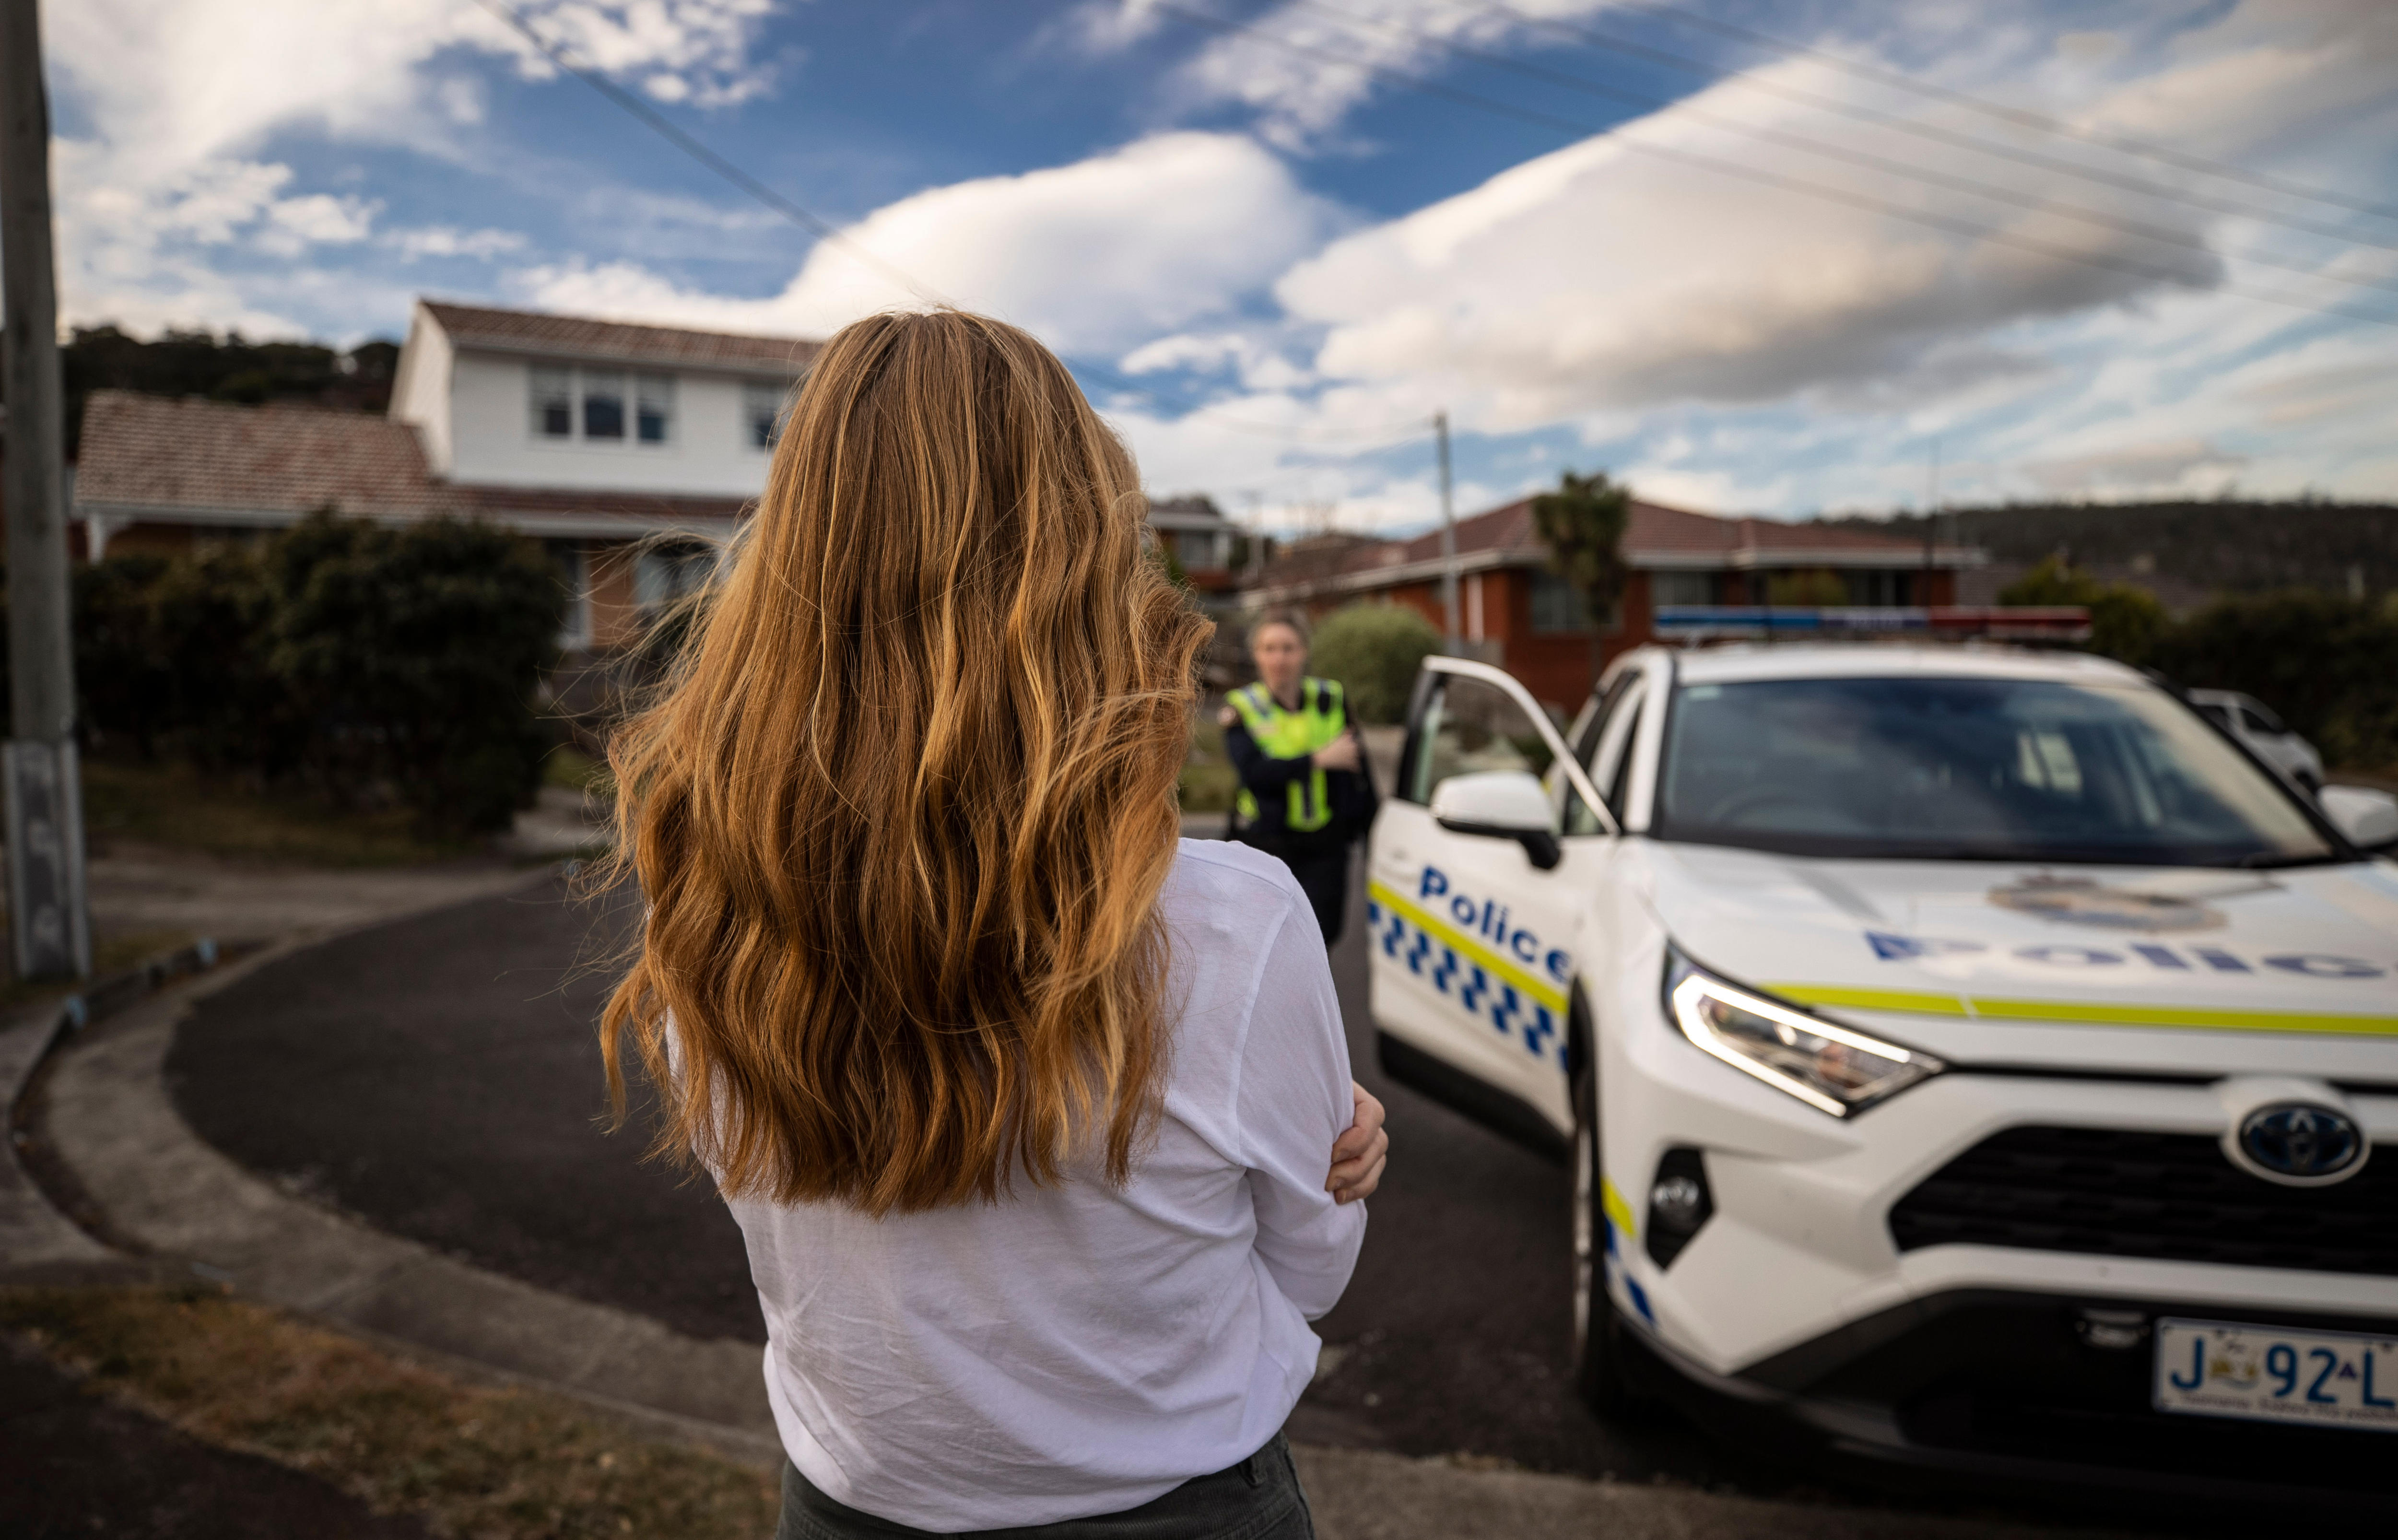 Calls for a ’holistic approach’ to combat DV